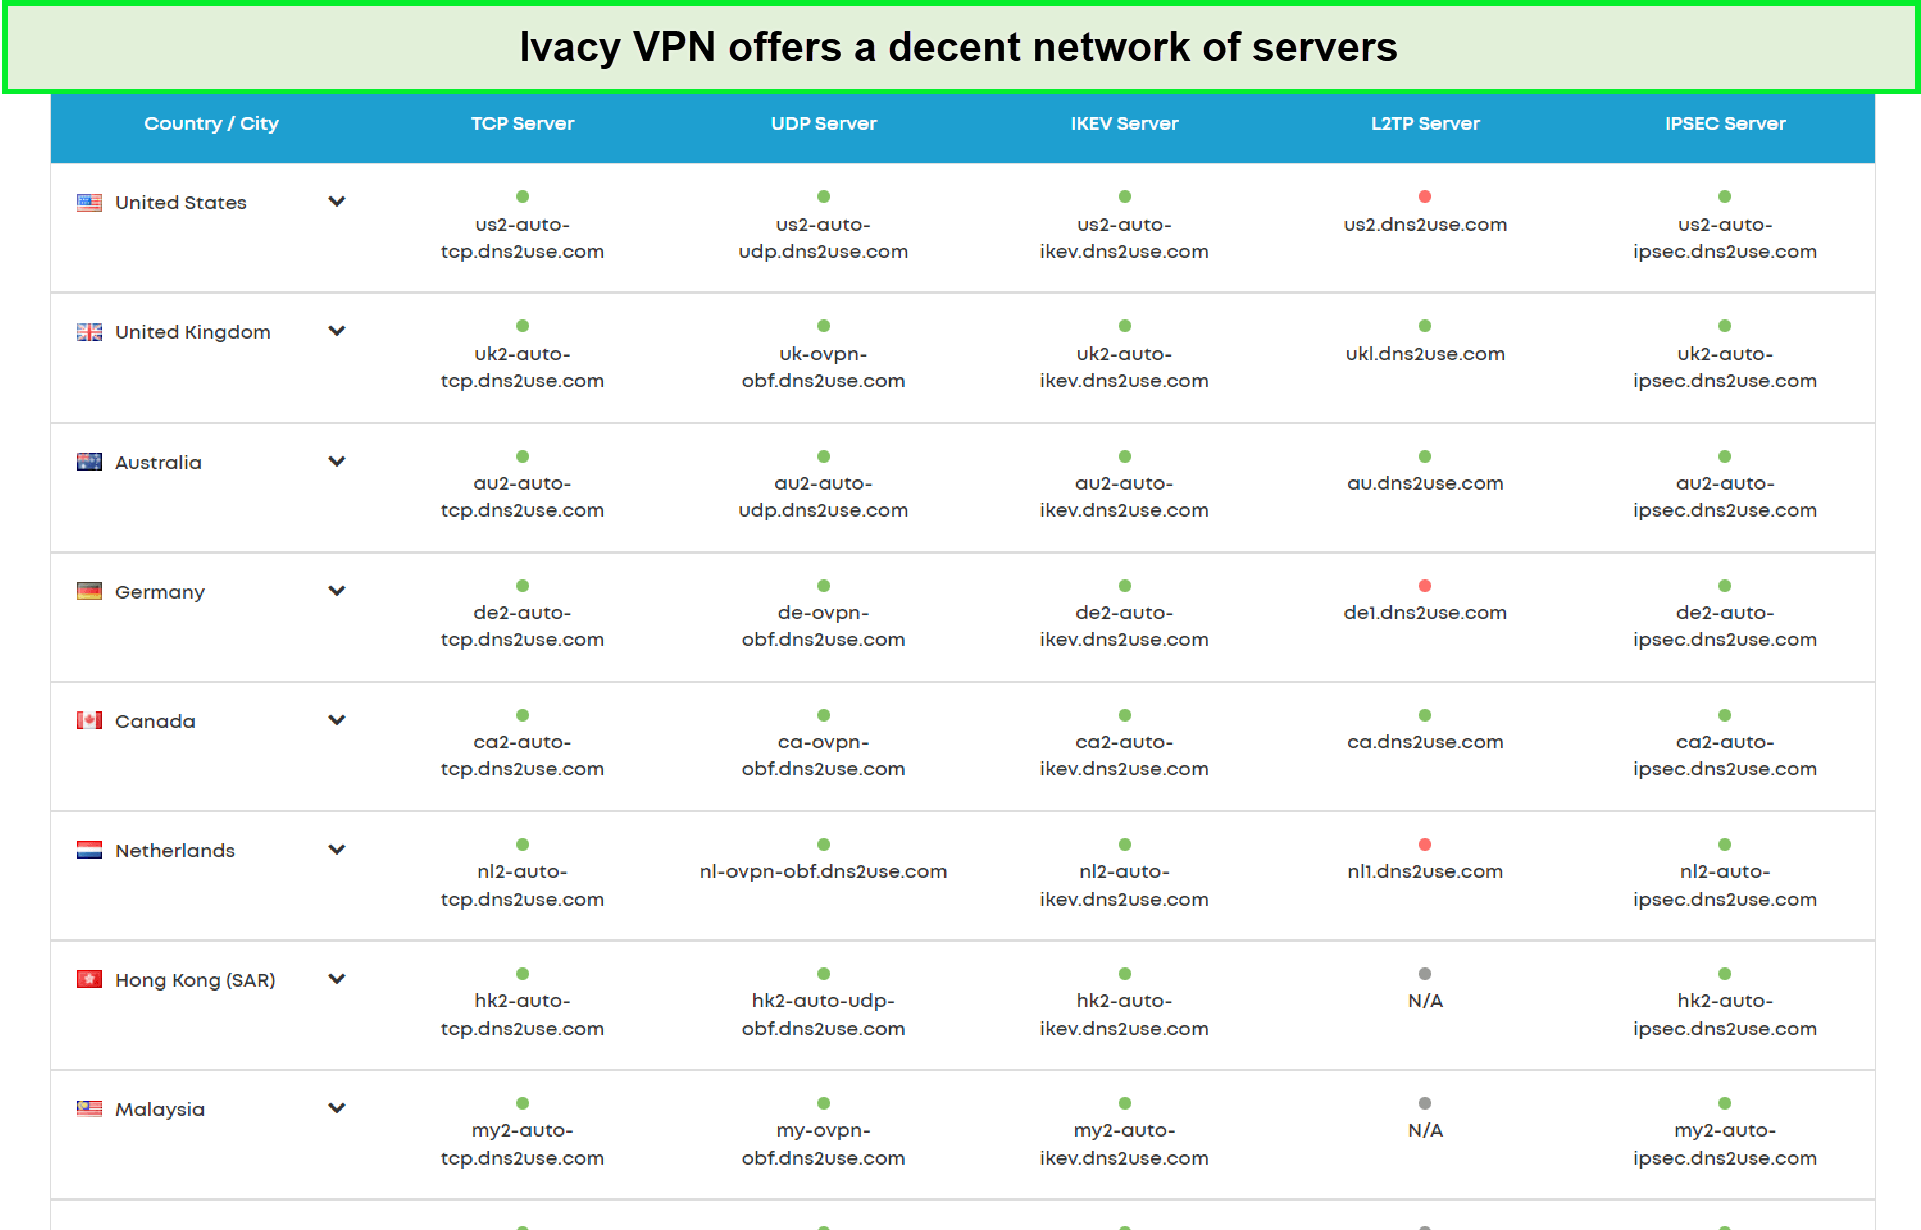 ivacy-server-network-in-France